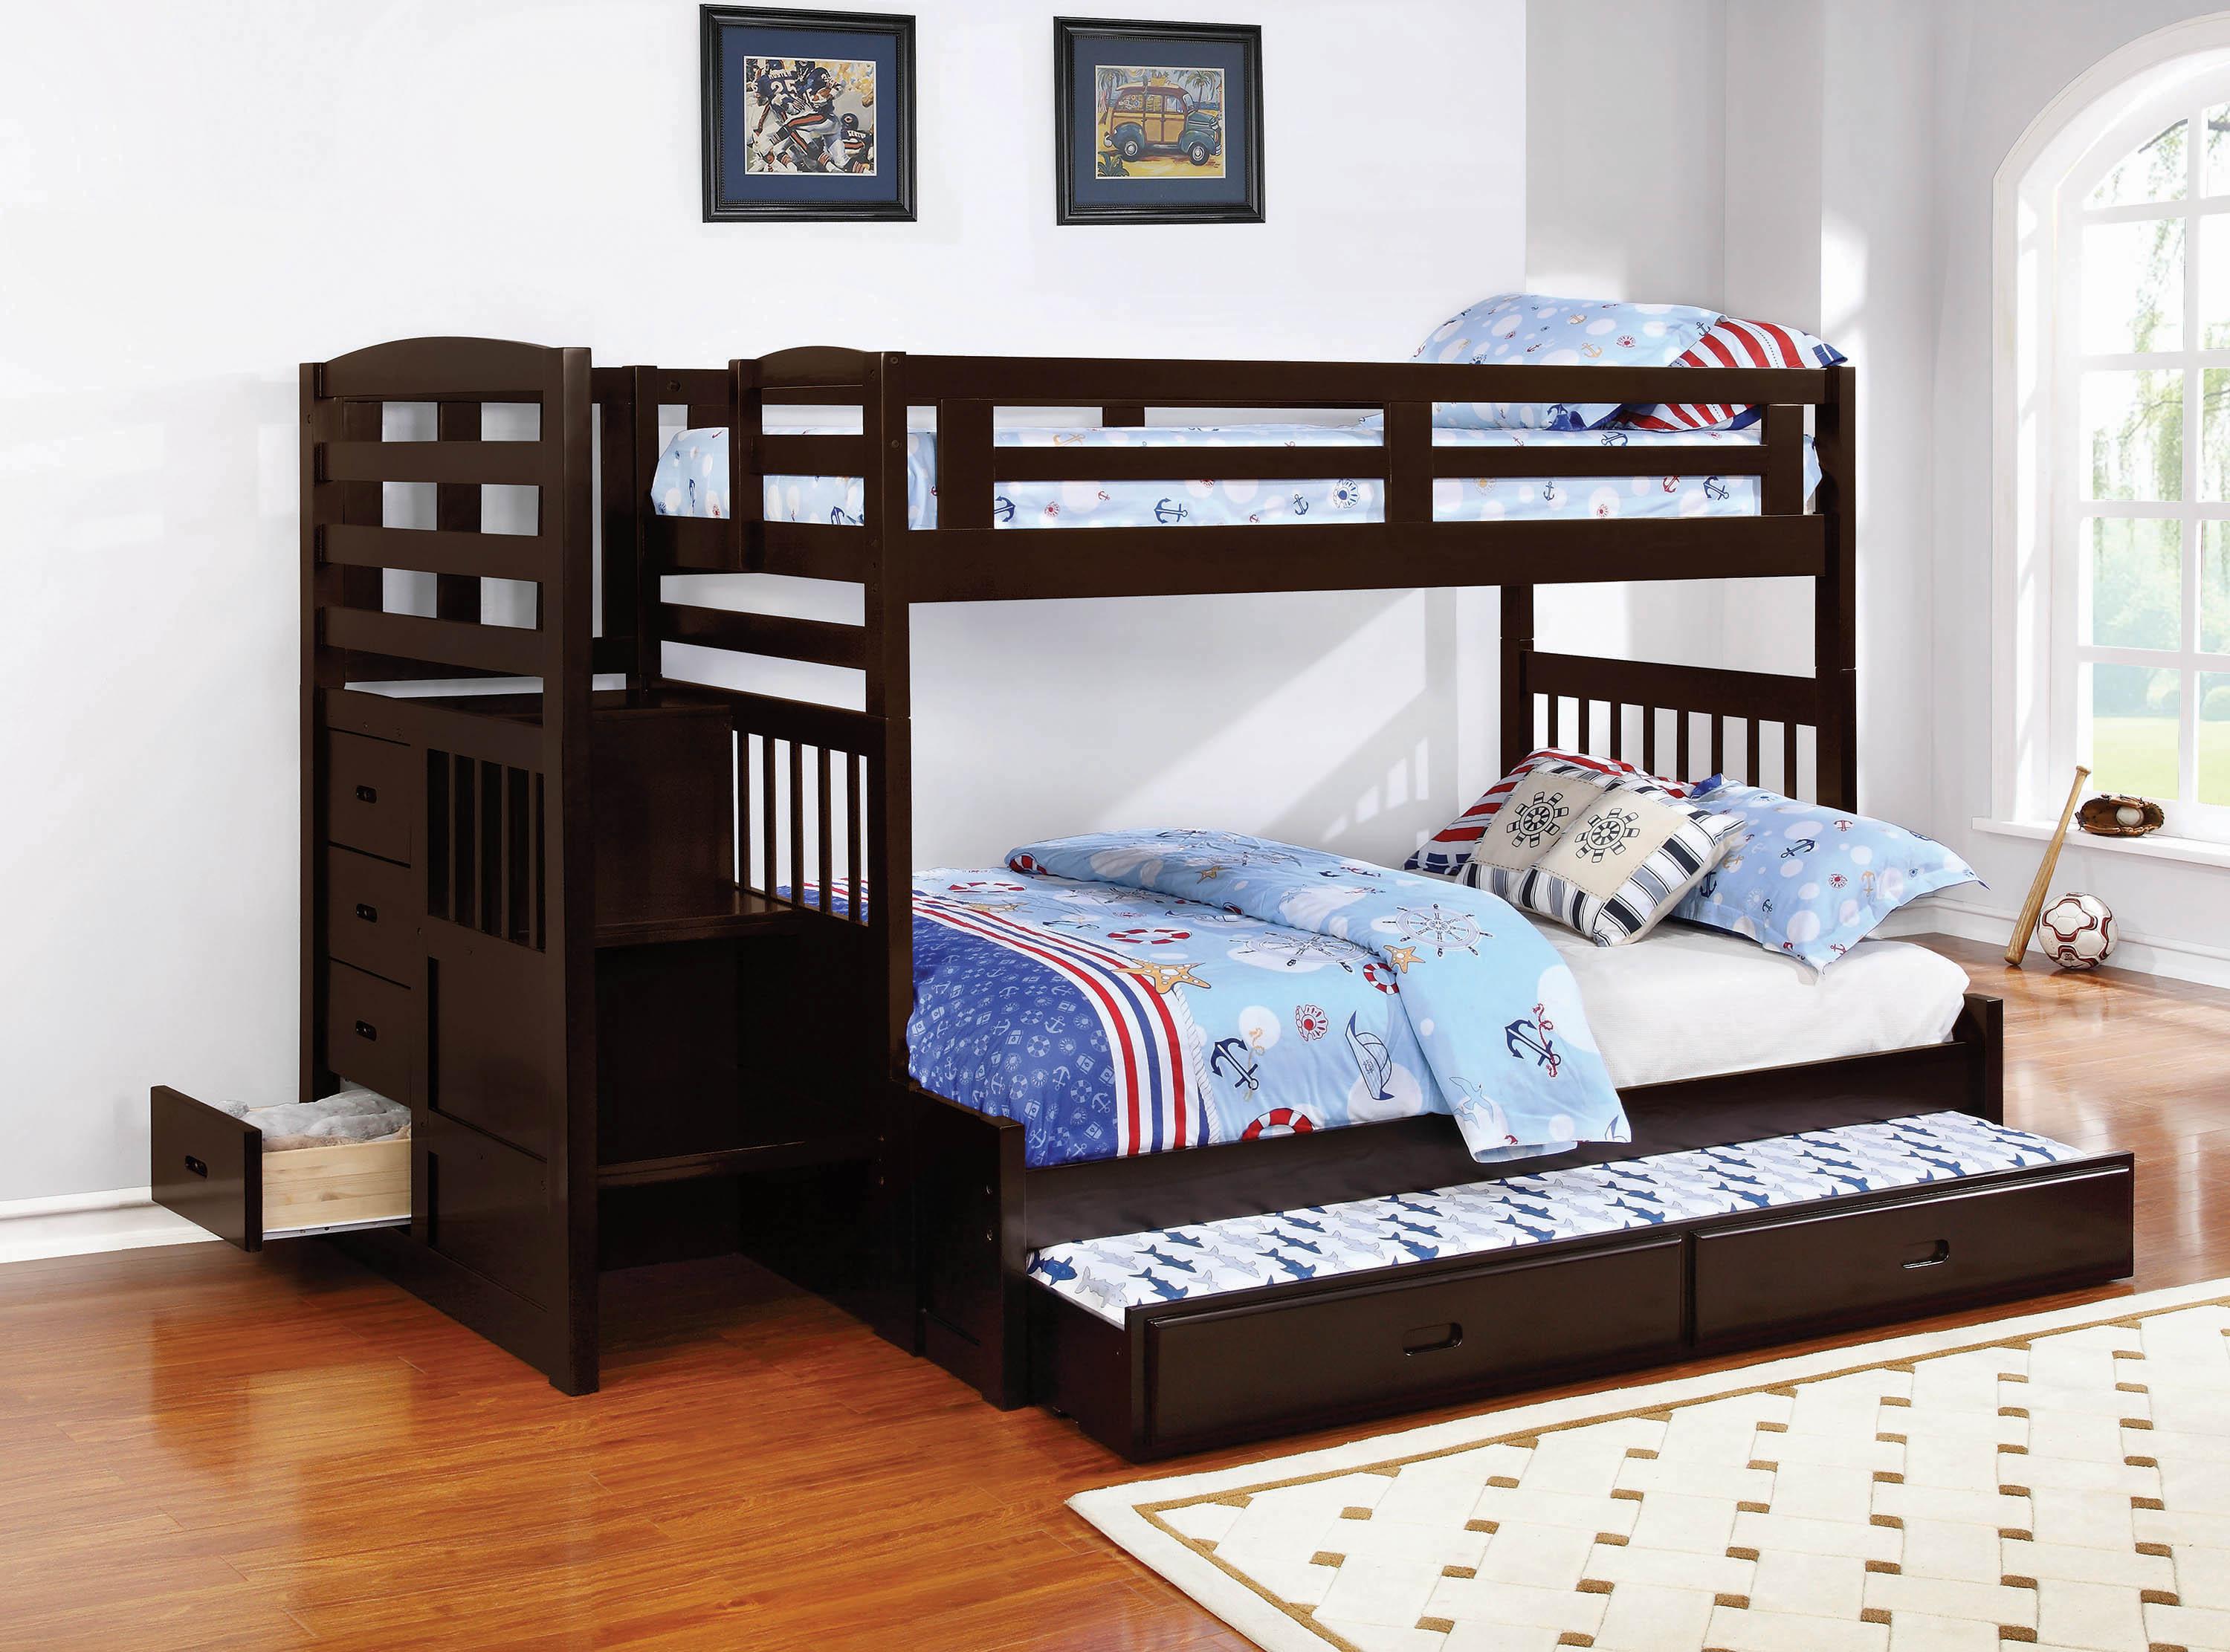 

    
Transitional Cappuccino Solid Pine Twin/Full Bunk Bed w/Trundle Coaster 460366 Dublin
